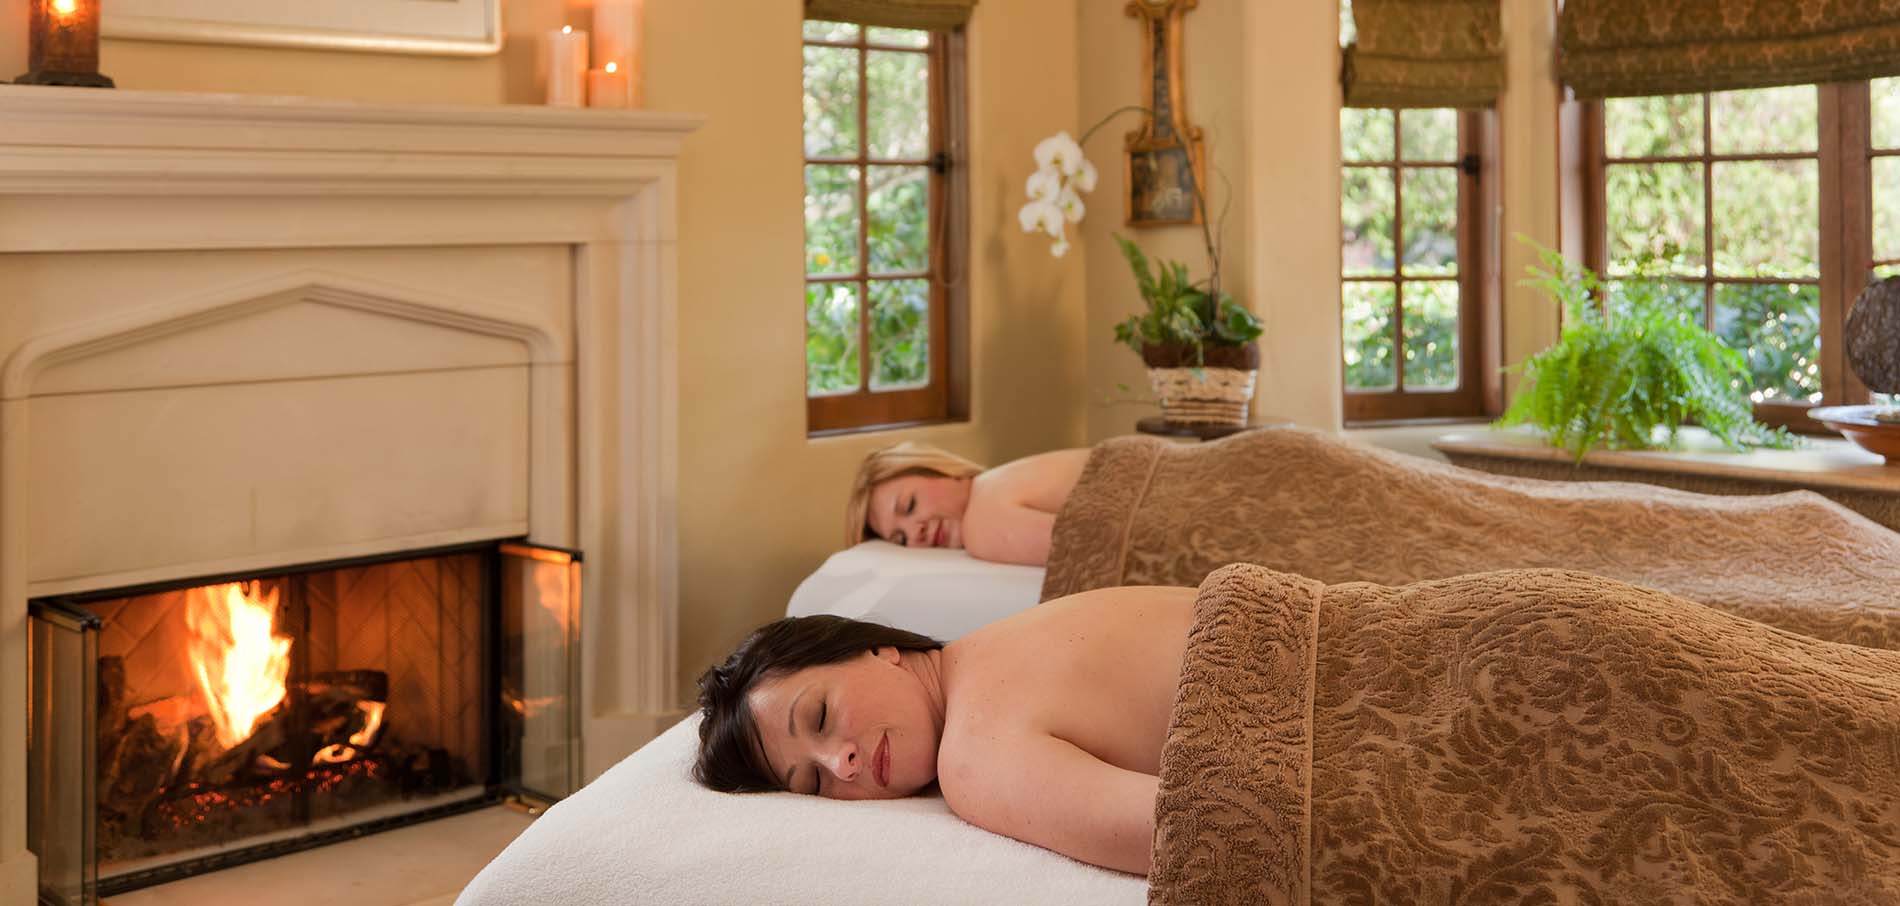 spa services at old monterey inn two woman on massage tables